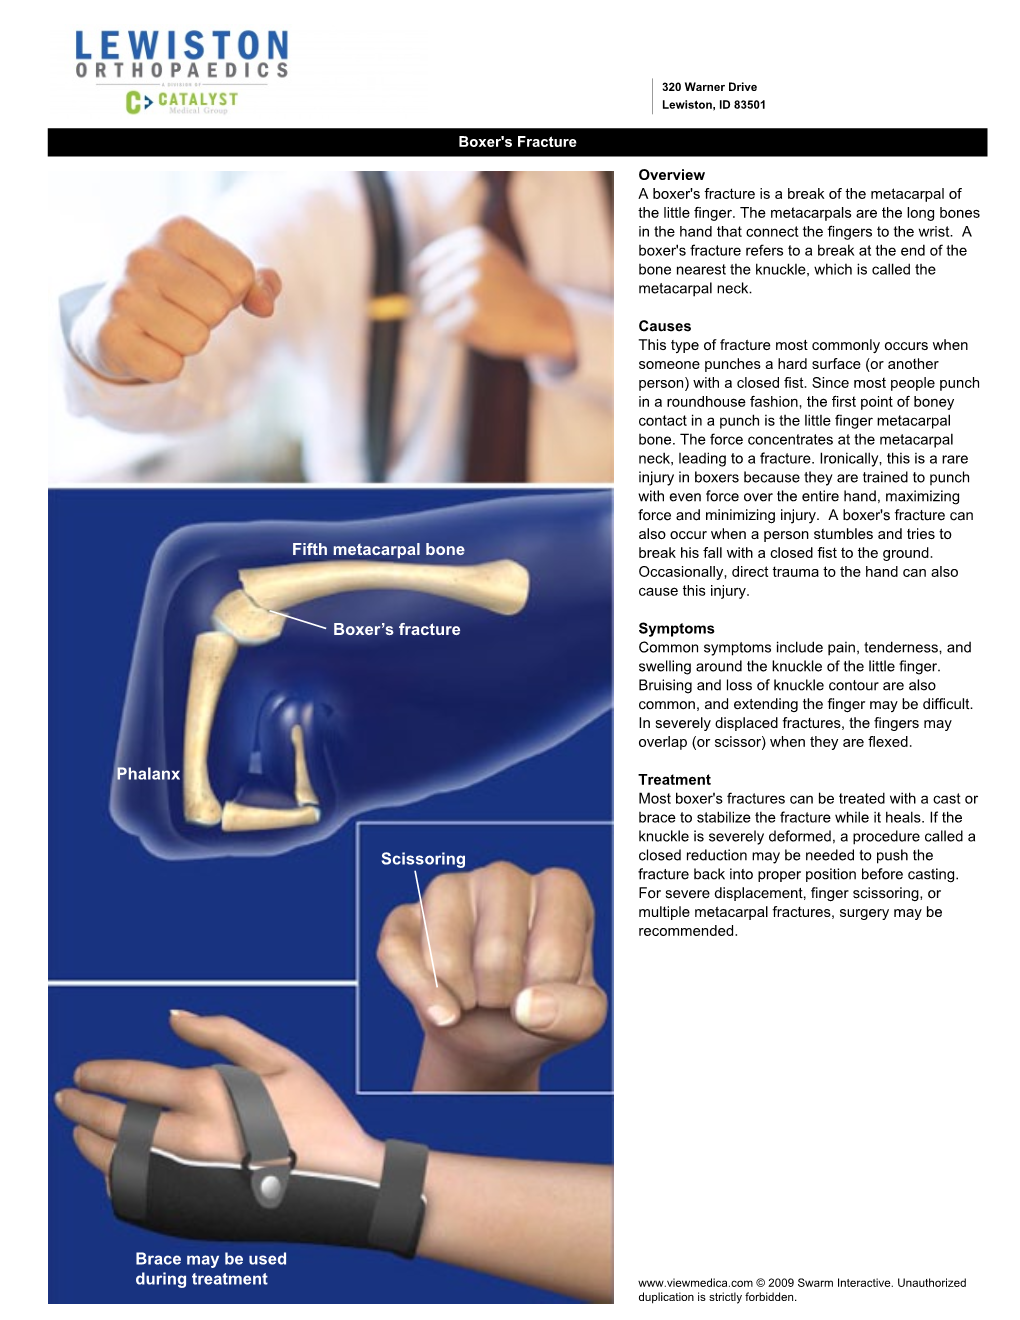 Fifth Metacarpal Bone Boxer's Fracture Phalanx Scissoring Brace May Be Used During Treatment